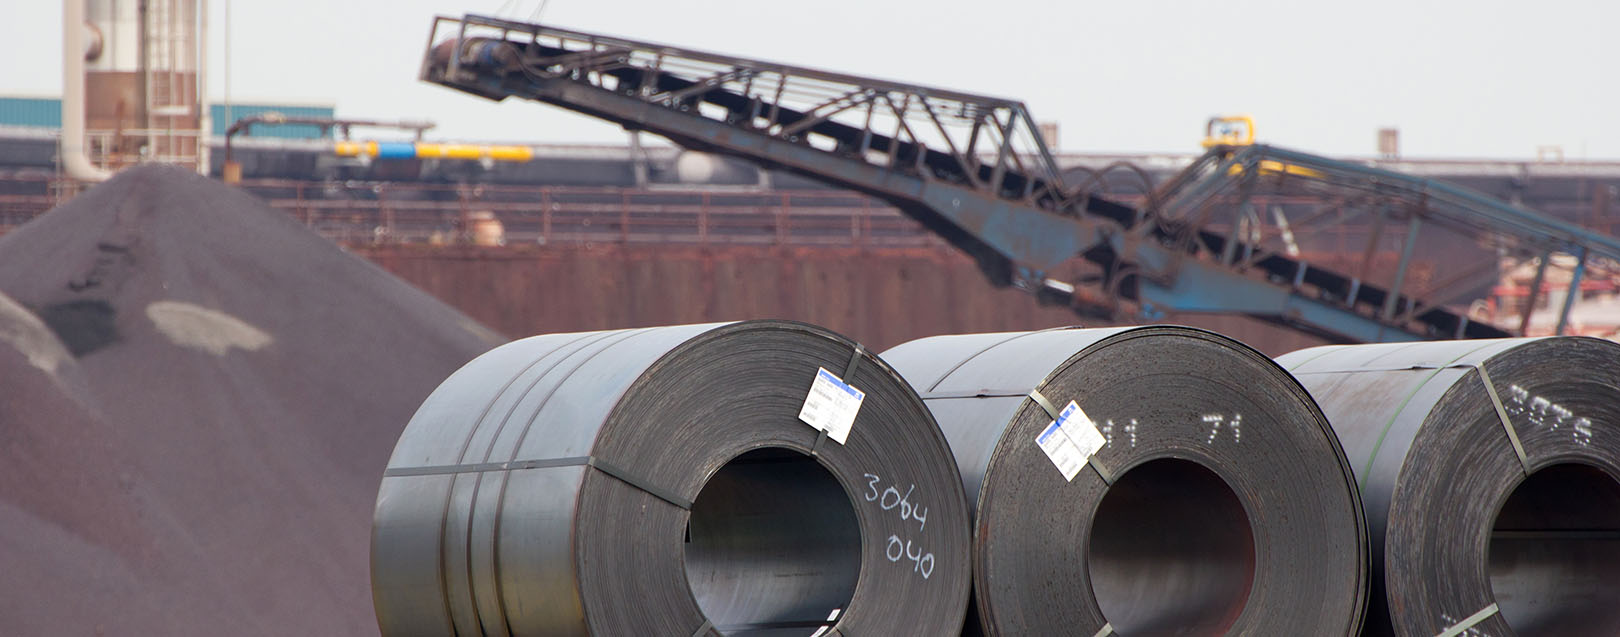 Govt imposes anti-dumping duty on imports of steel products from China